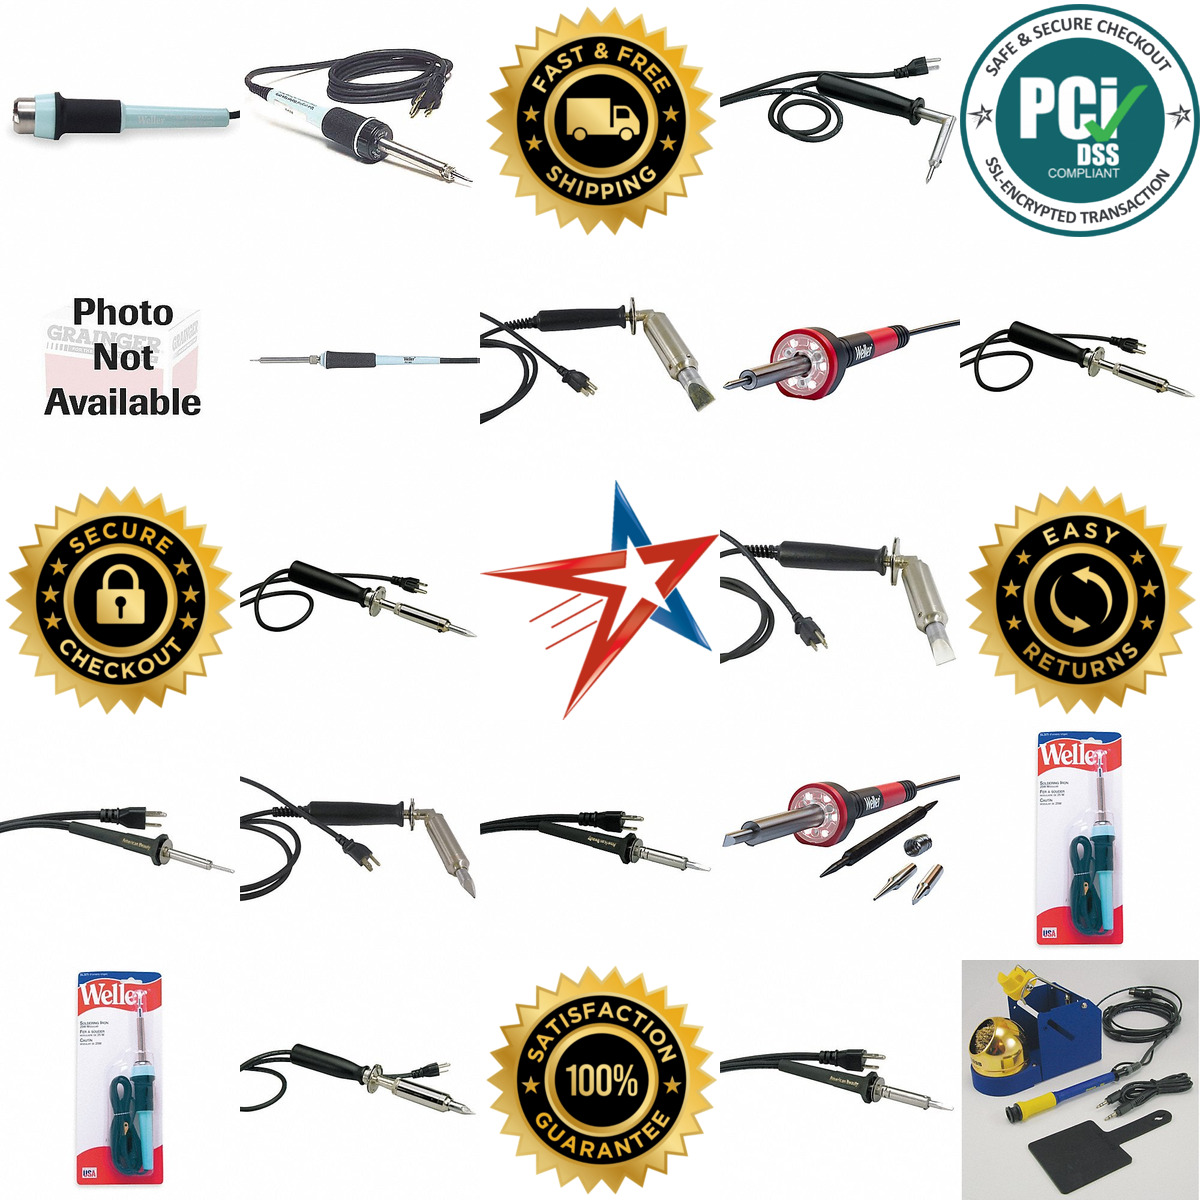 A selection of Corded Electric Soldering Irons Guns and Kits products on GoVets